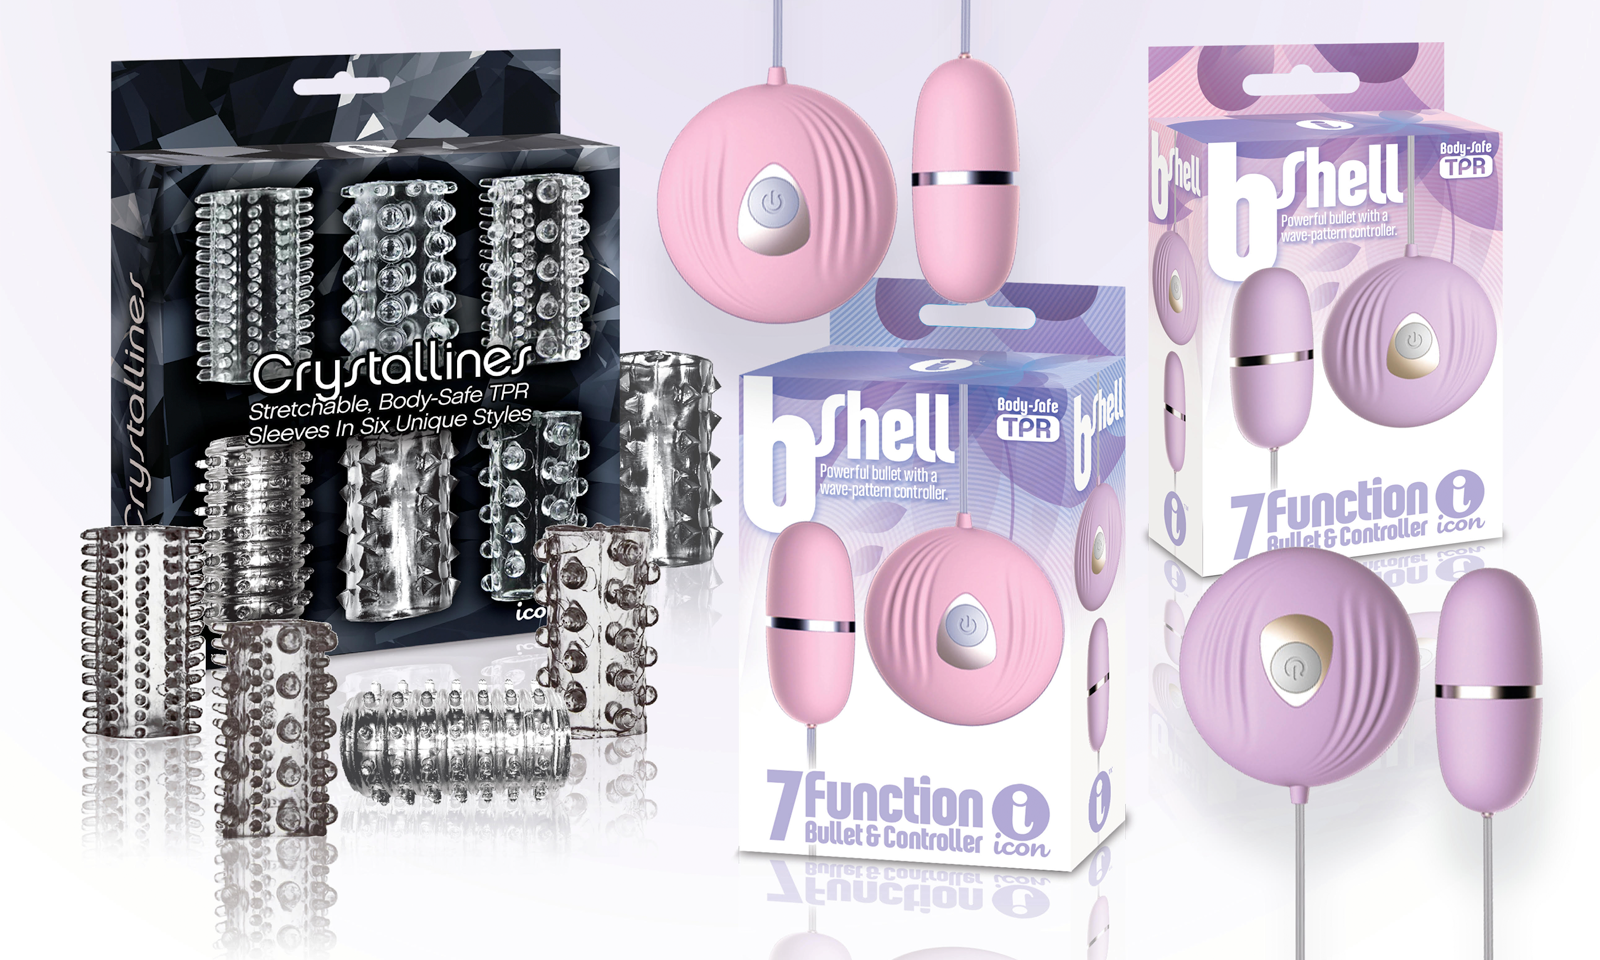 Icon Brands Adds Crystals, Shells to Popular Nines Range